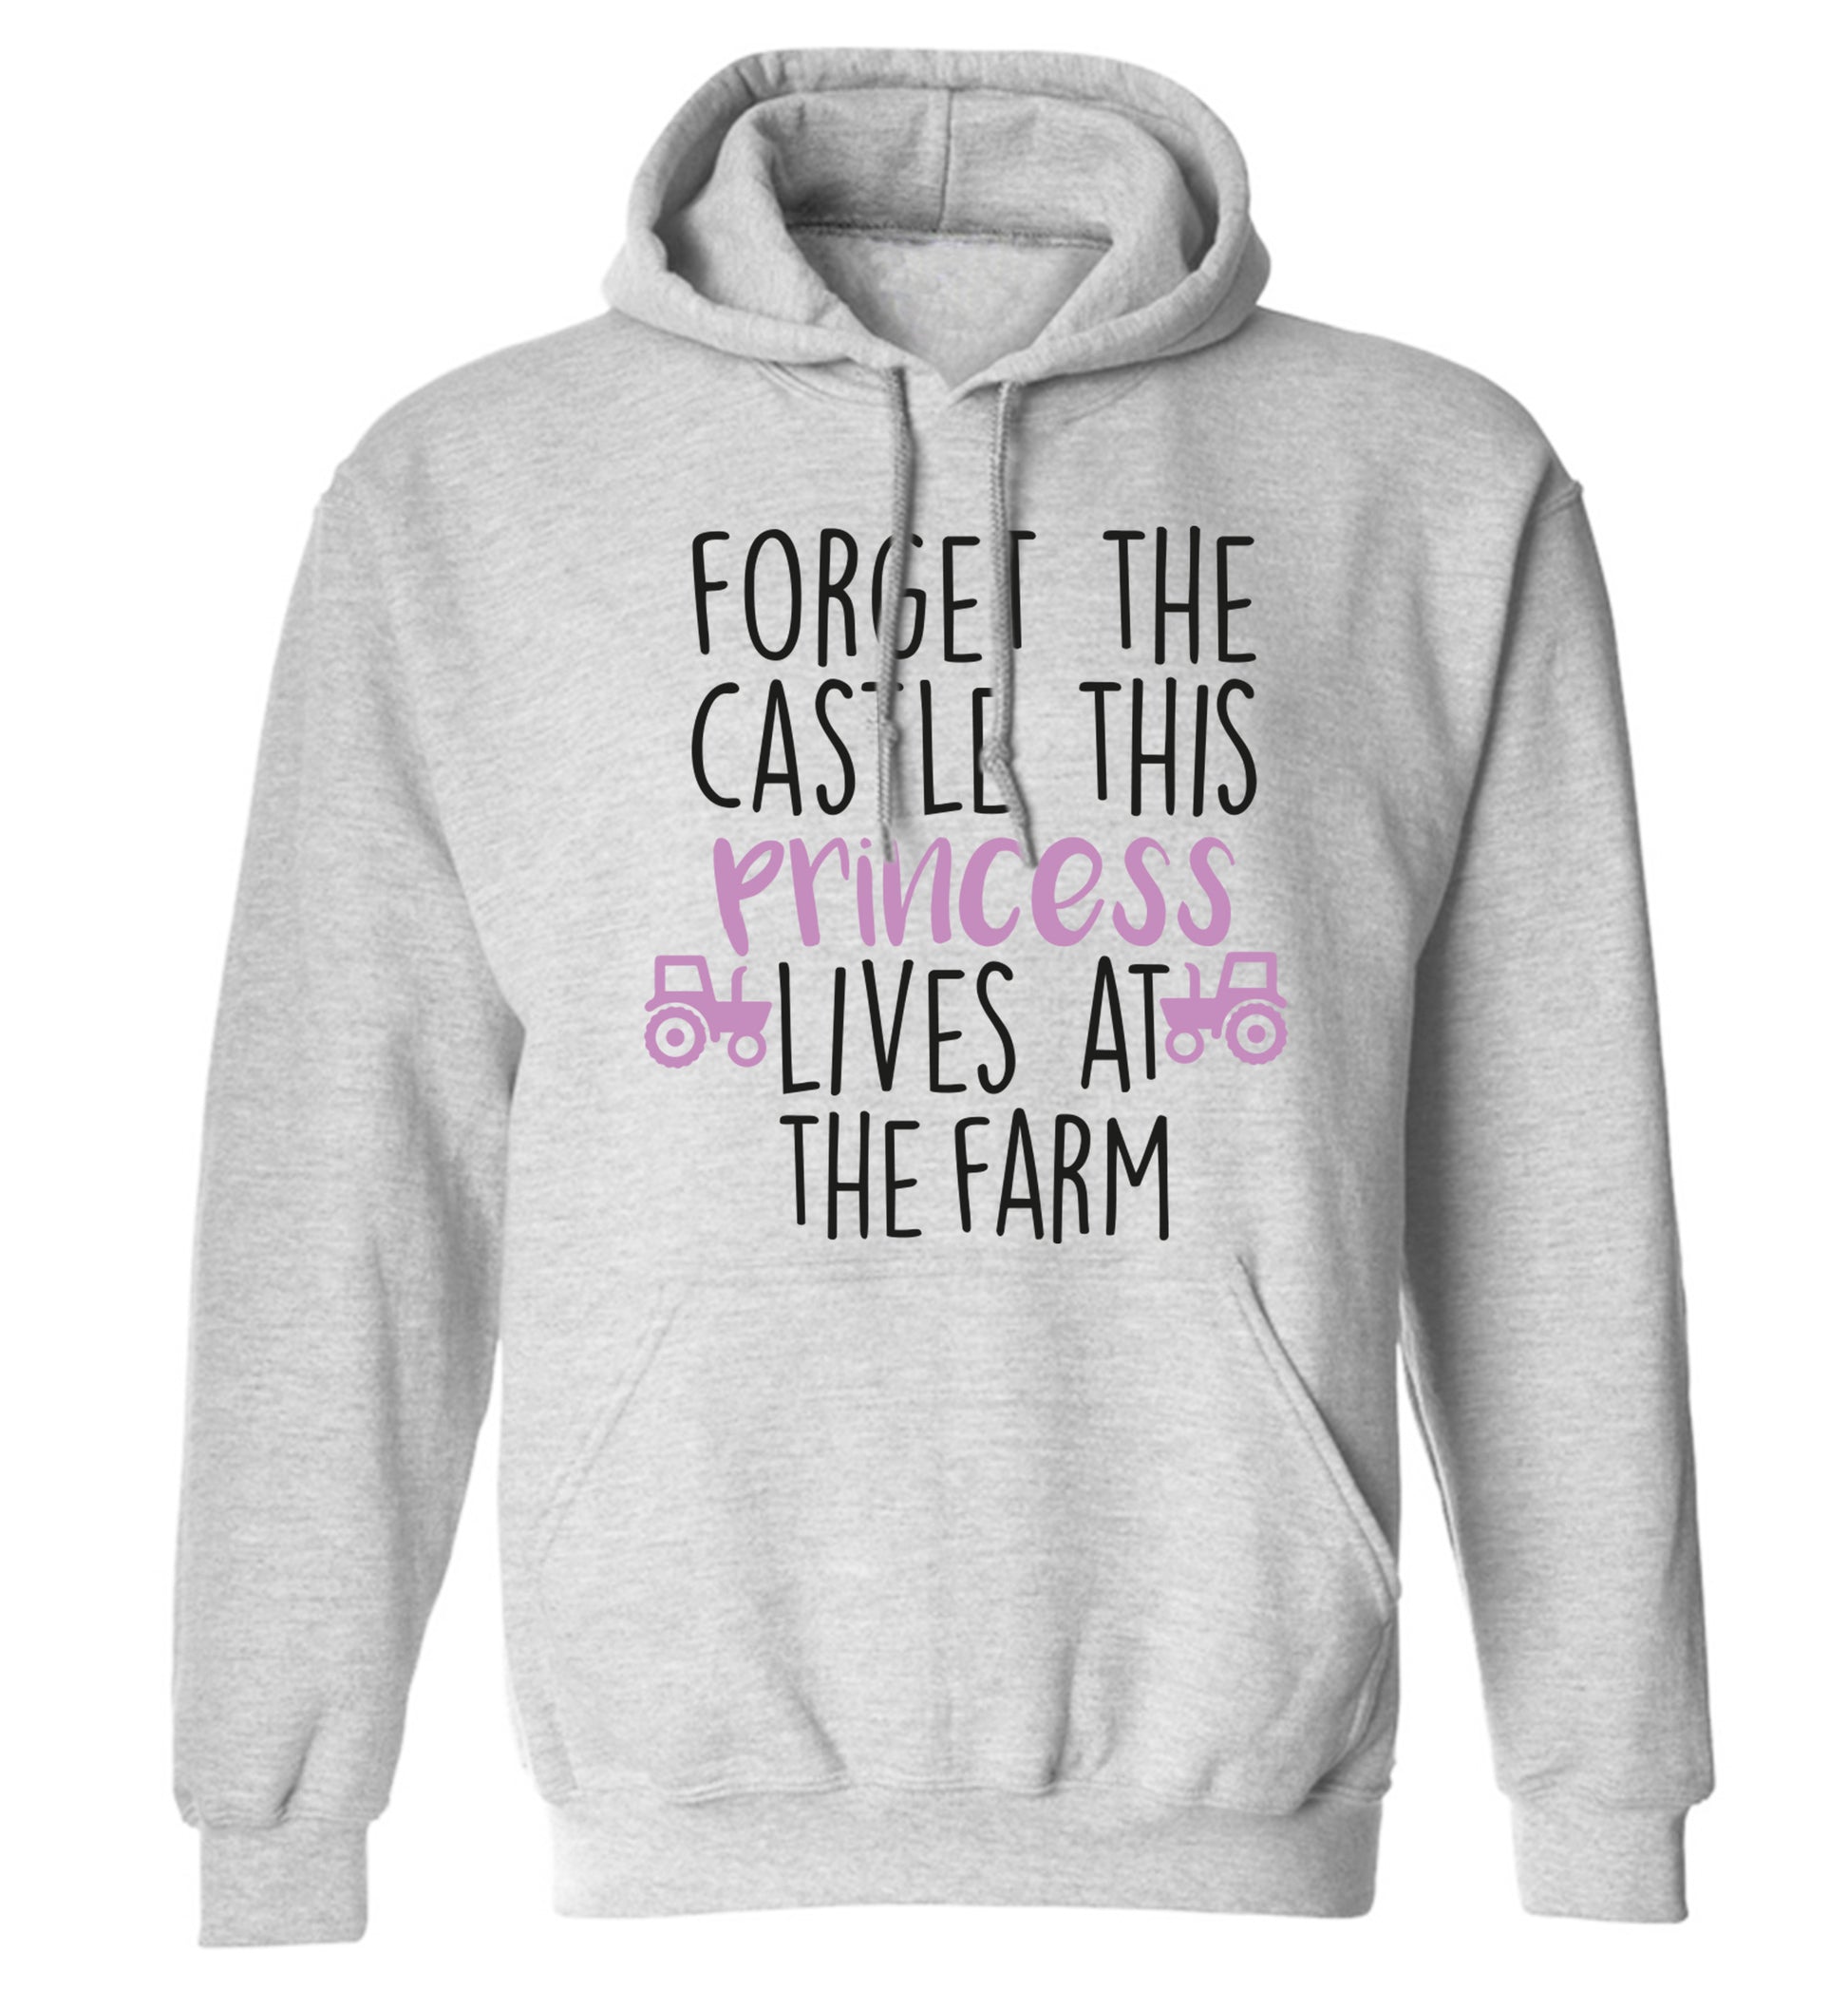 Forget the castle this princess lives at the farm adults unisex grey hoodie 2XL